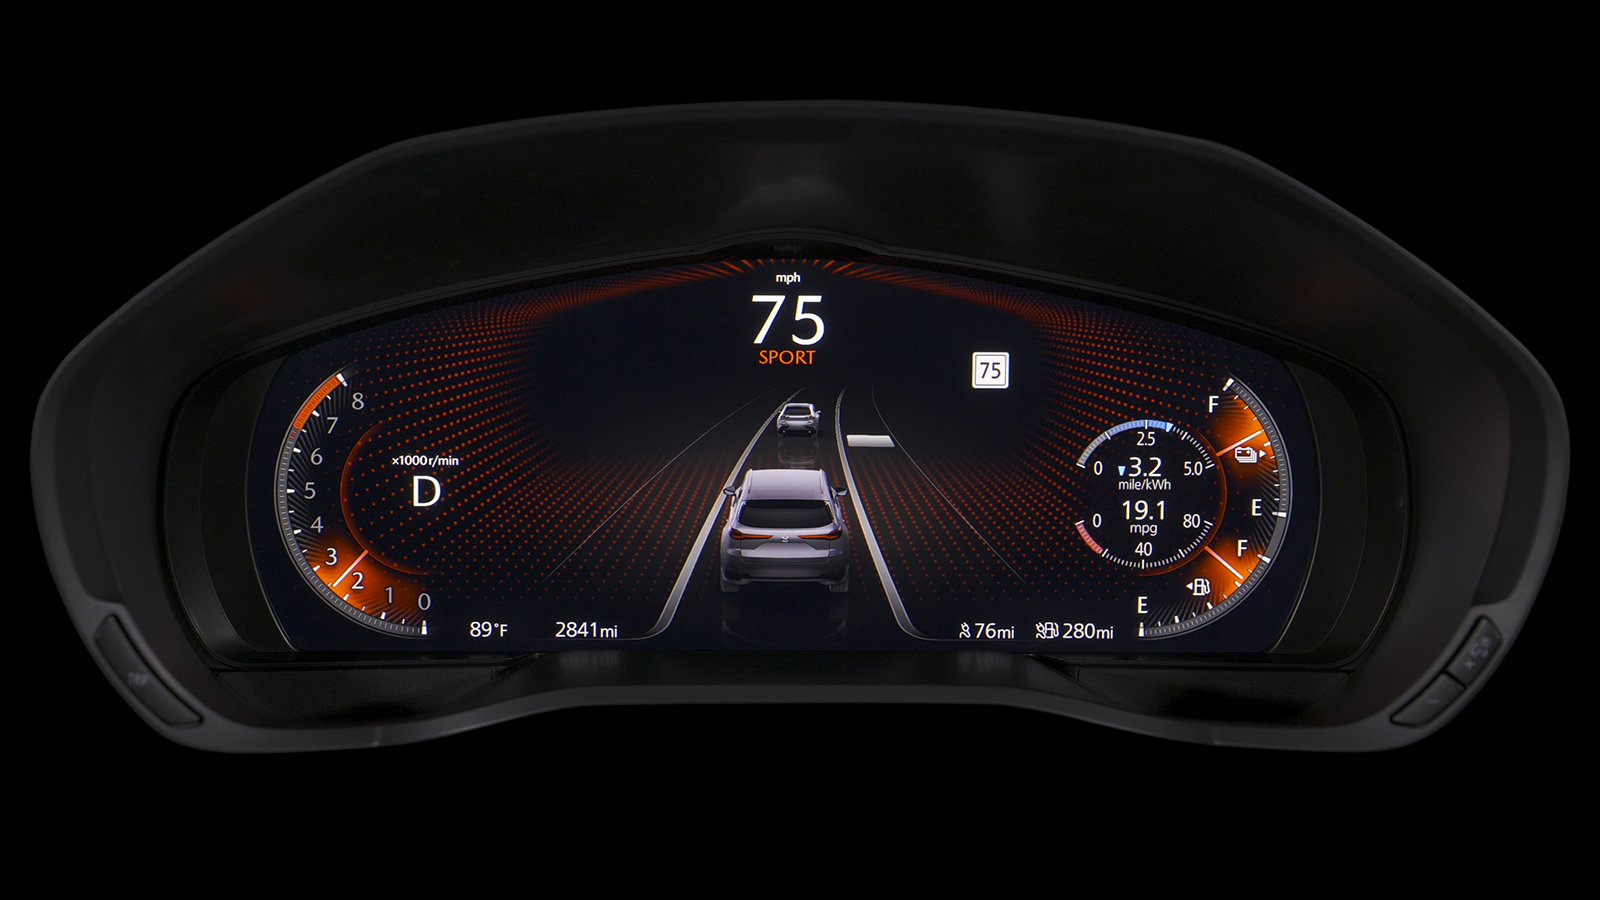 image:Driving Assist System Information Screen